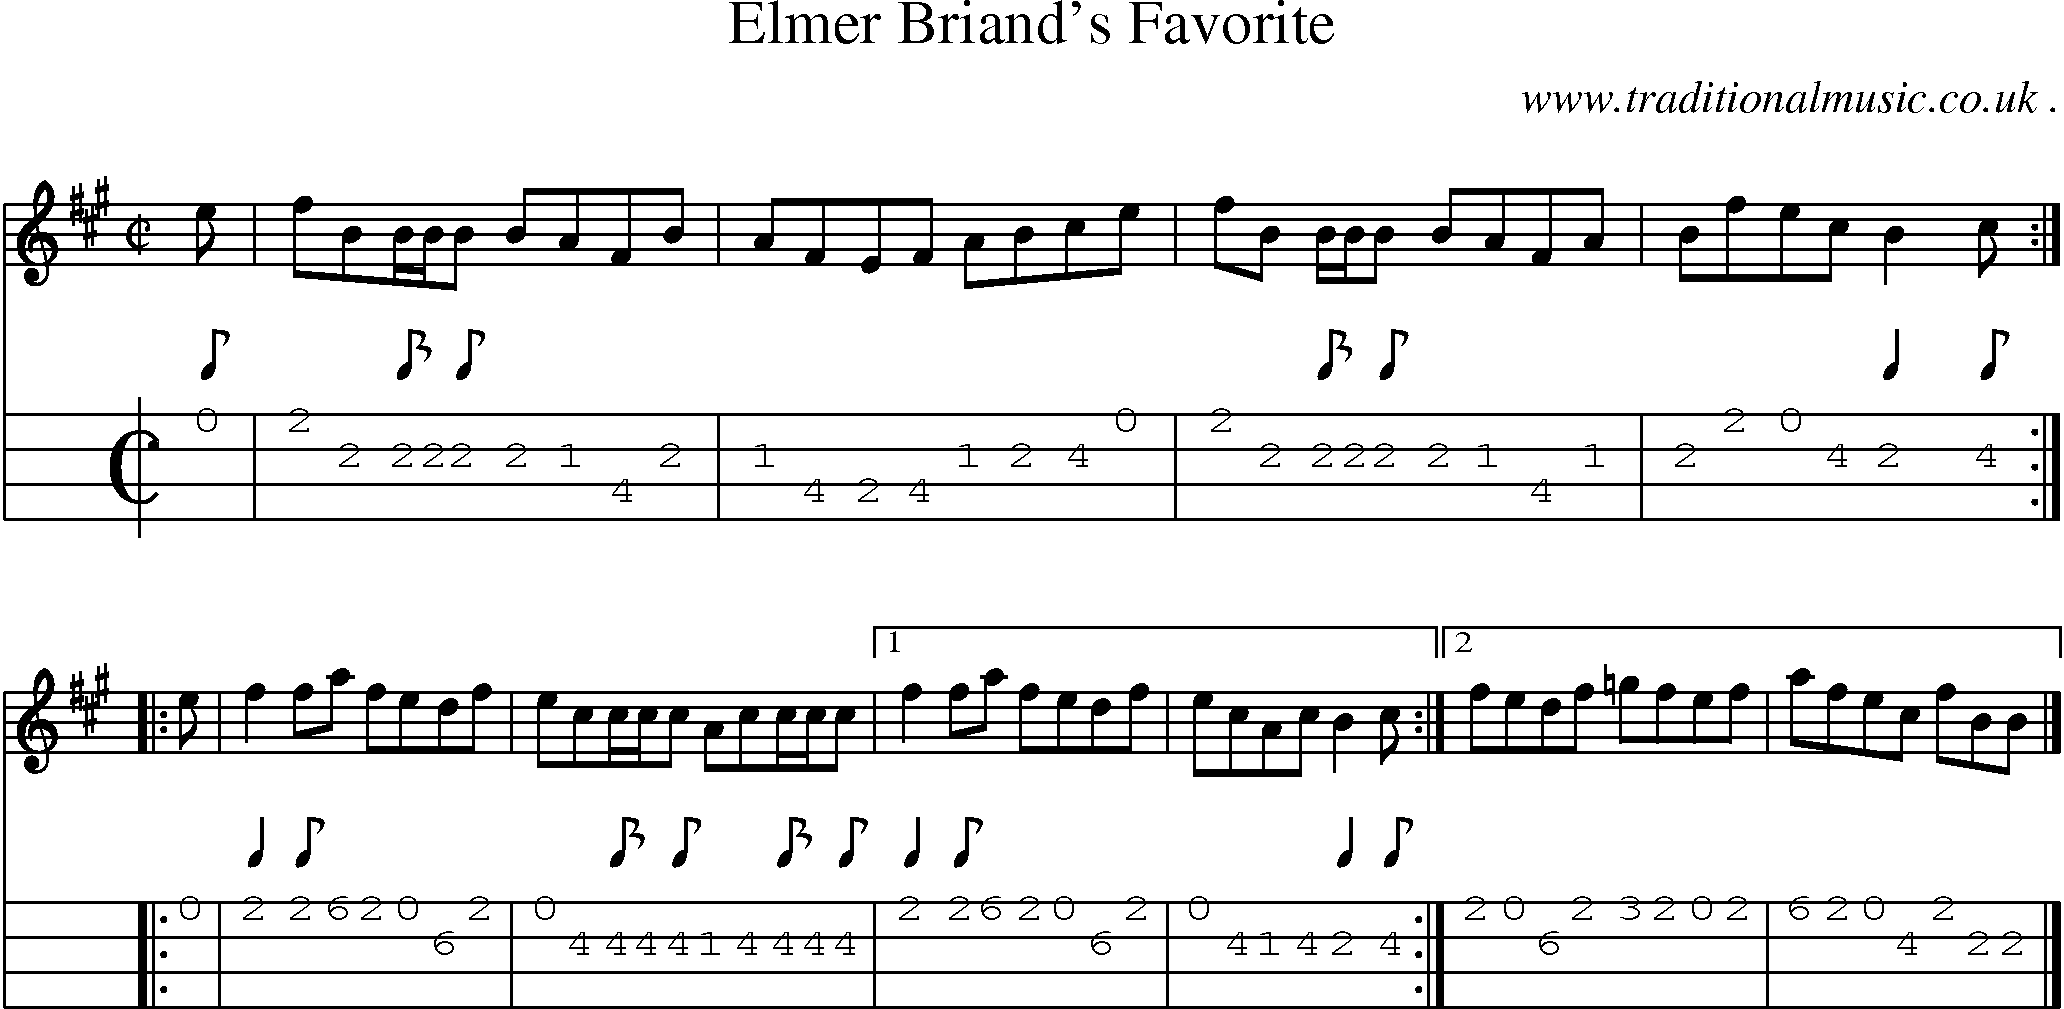 Sheet-music  score, Chords and Mandolin Tabs for Elmer Briands Favorite